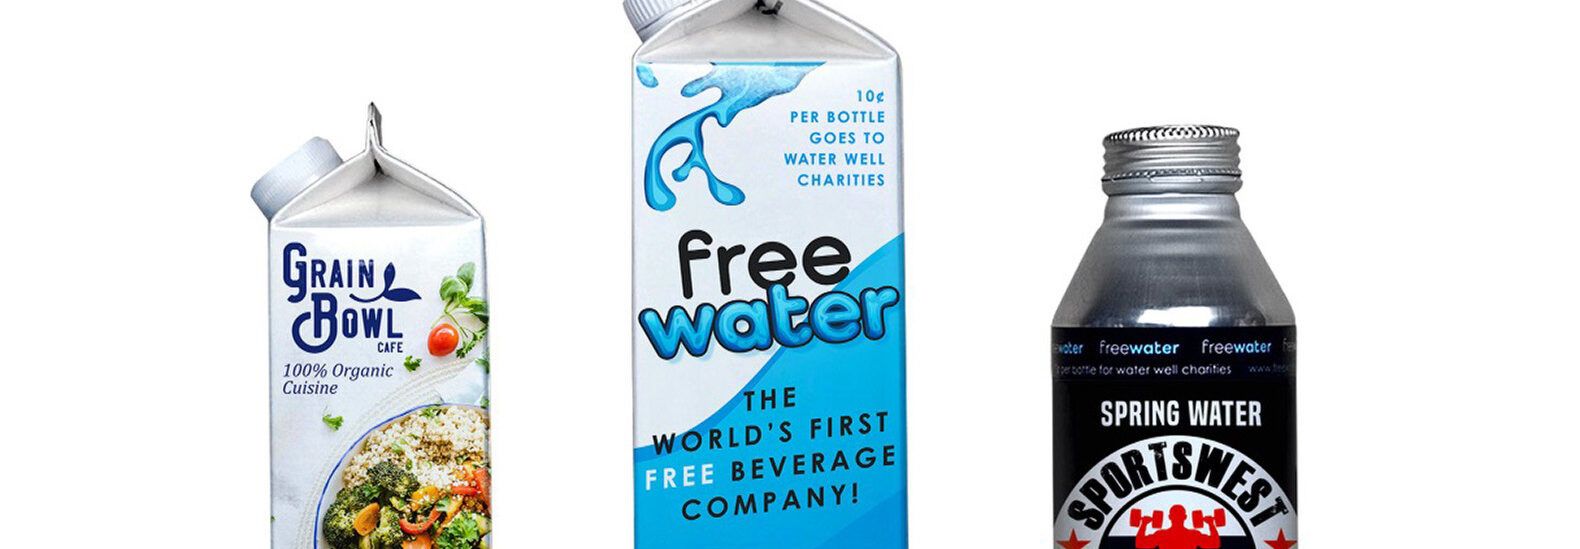 FreeWater is the startup connecting people to free, clean water